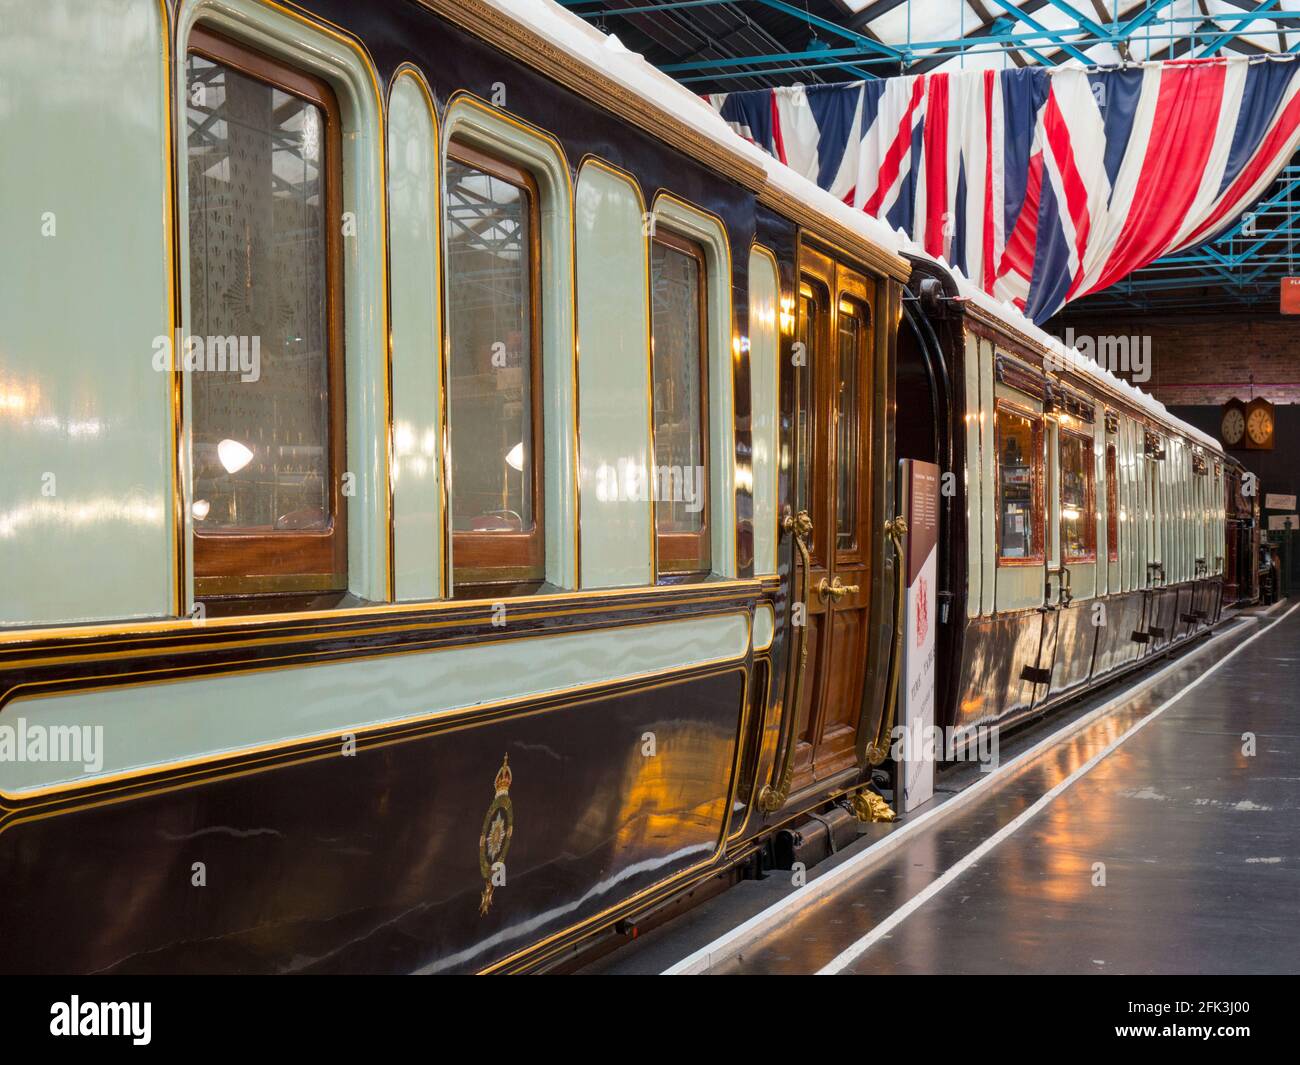 York, North Yorkshire, England. Royal train carriages on display beneath Union Jacks at the National Railway Museum. Stock Photo